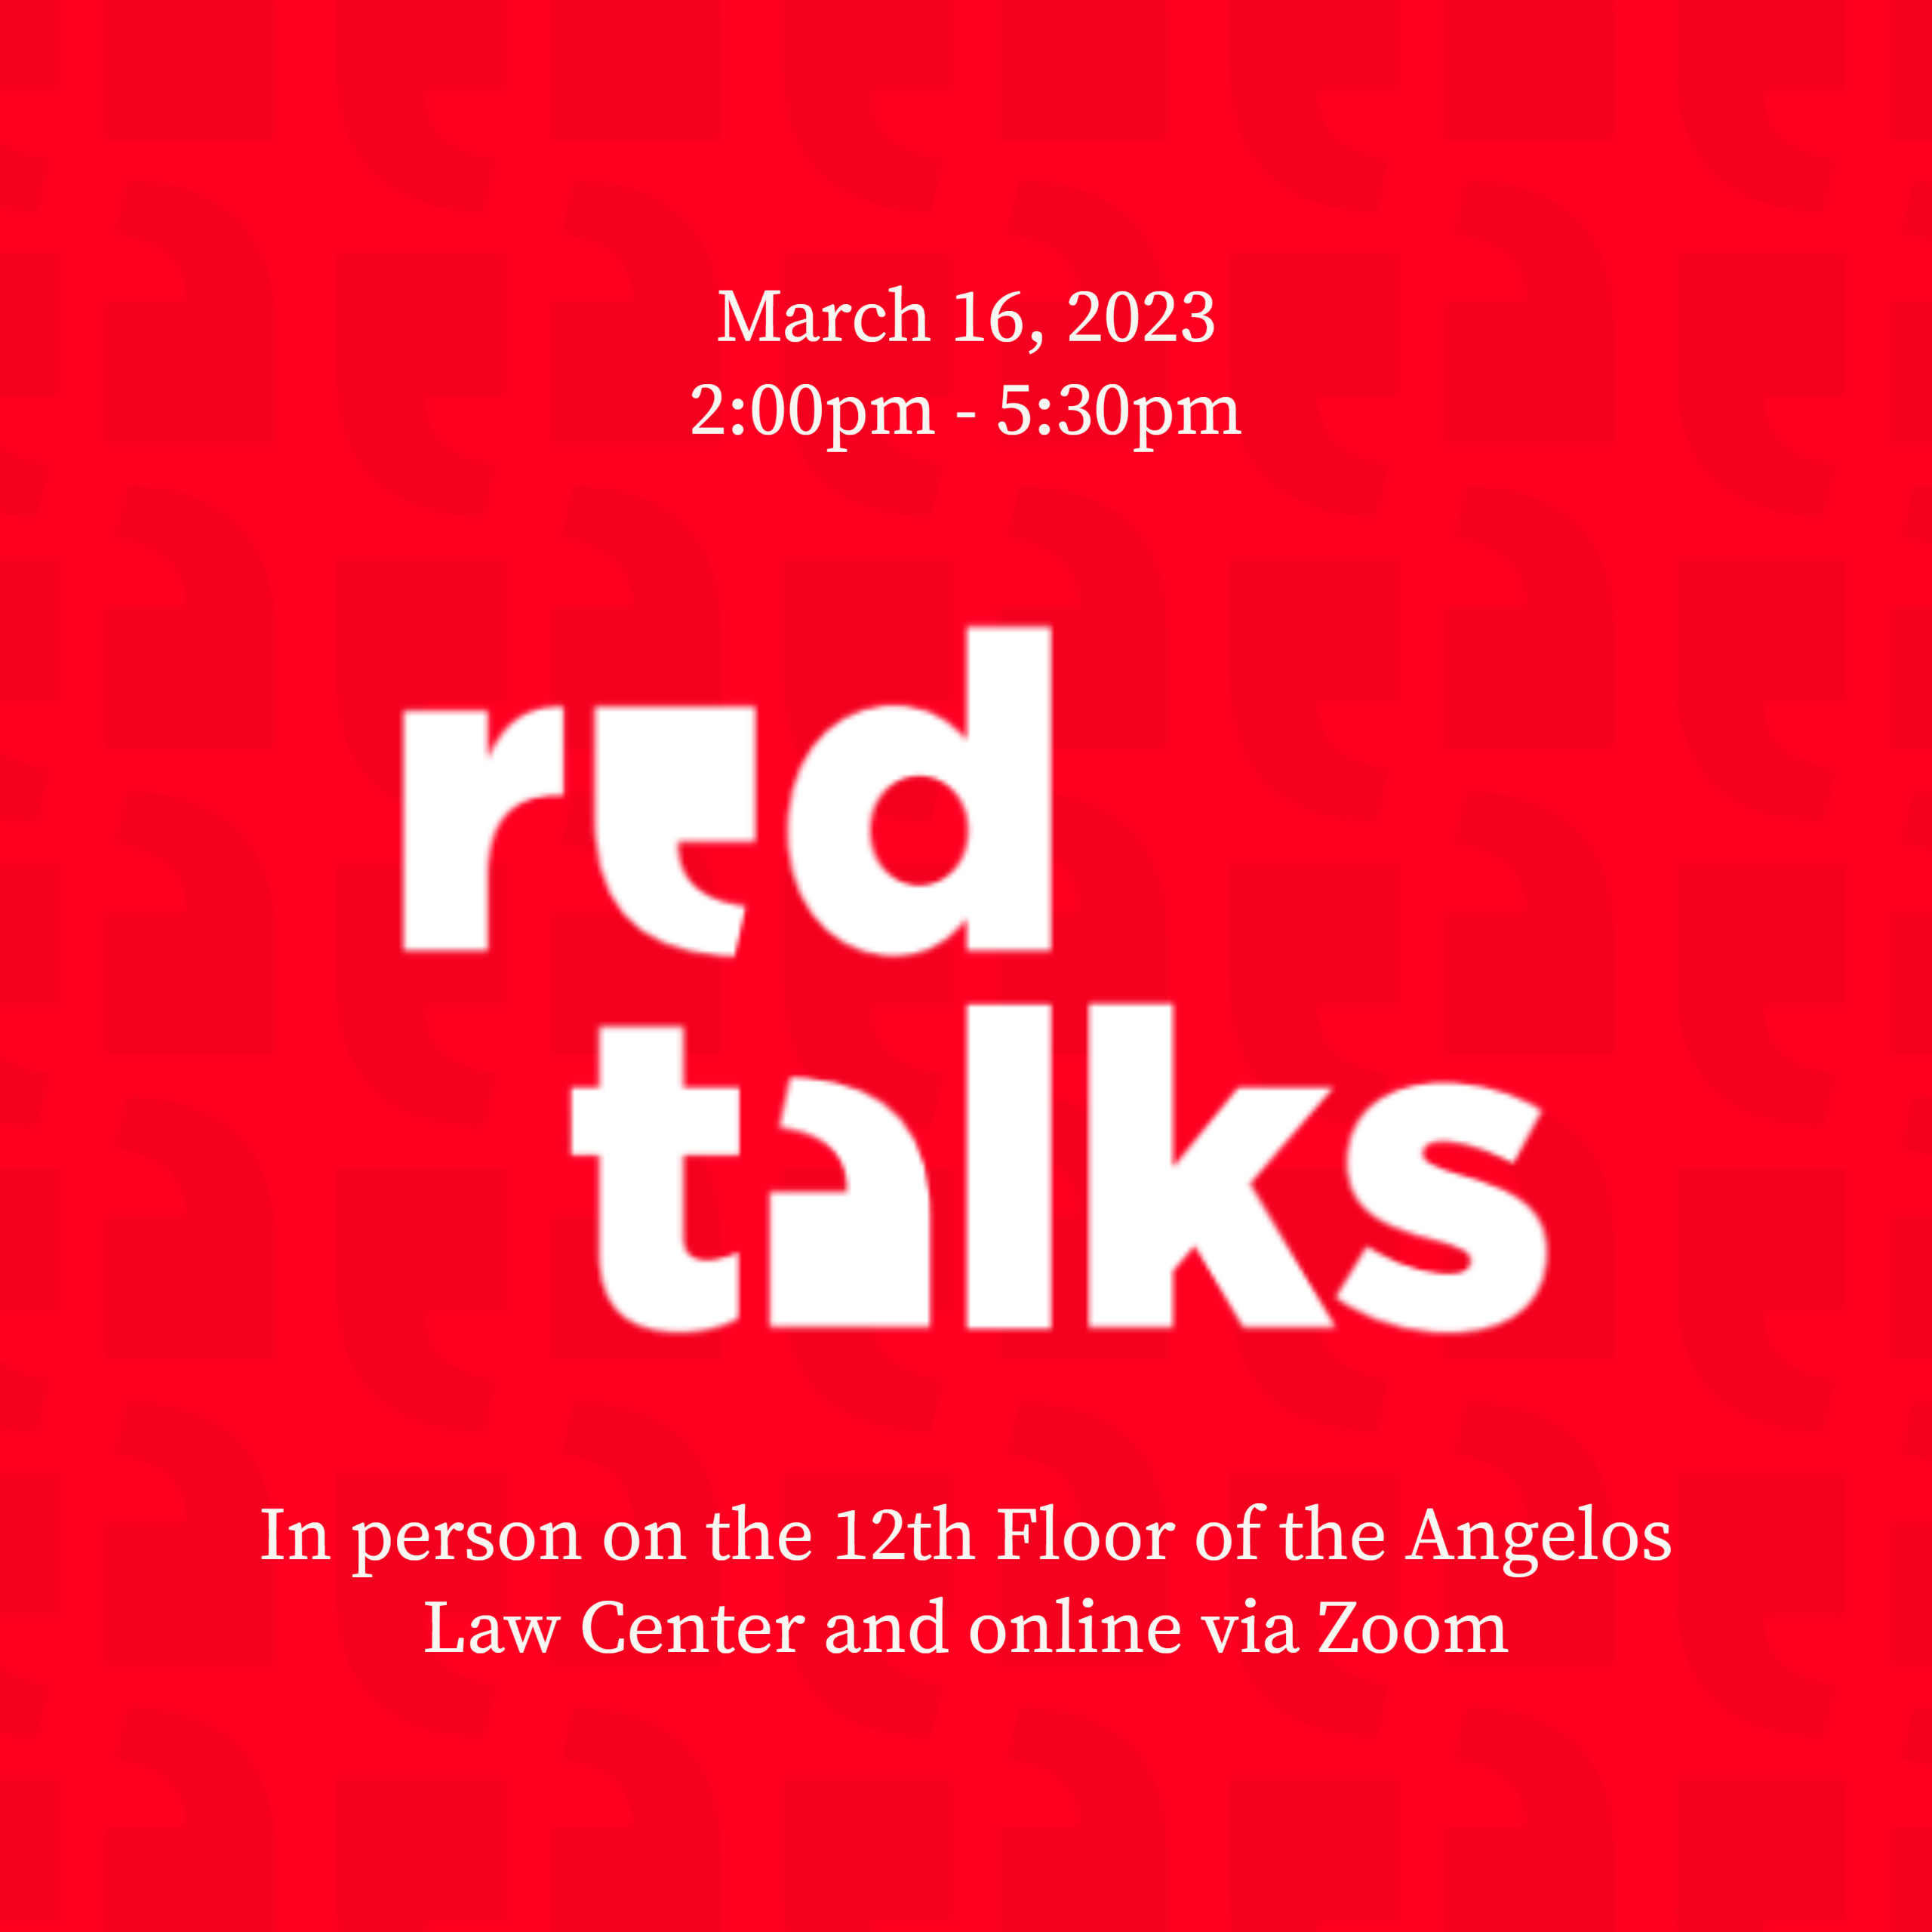 Red Talks 2023. March 16, 2023. 2:00pm - 5:30pm.